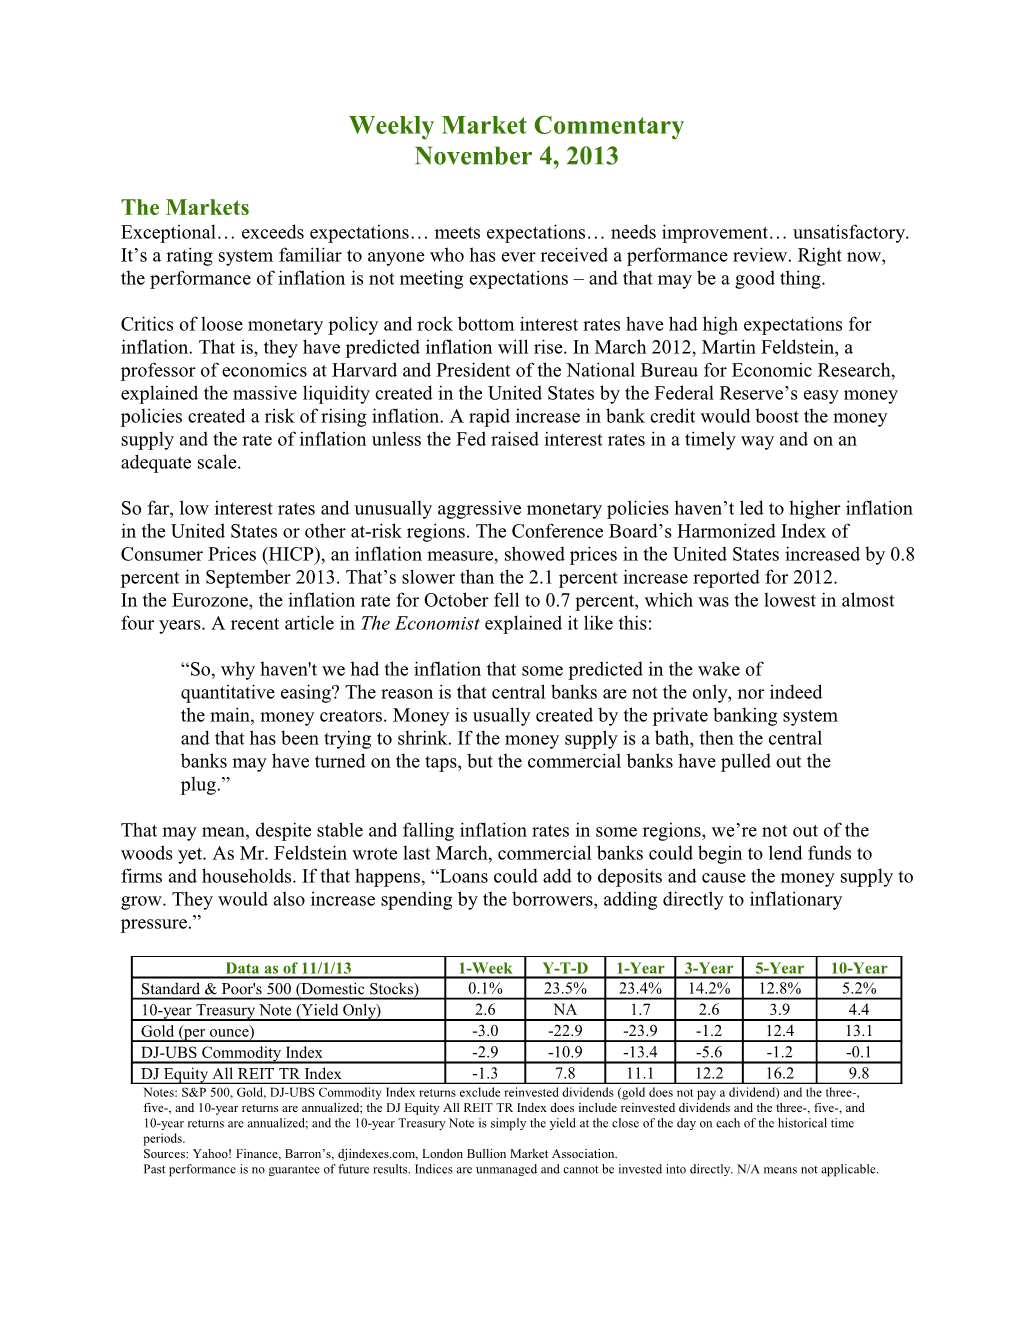 Weekly Commentary 11-04-13 PAA